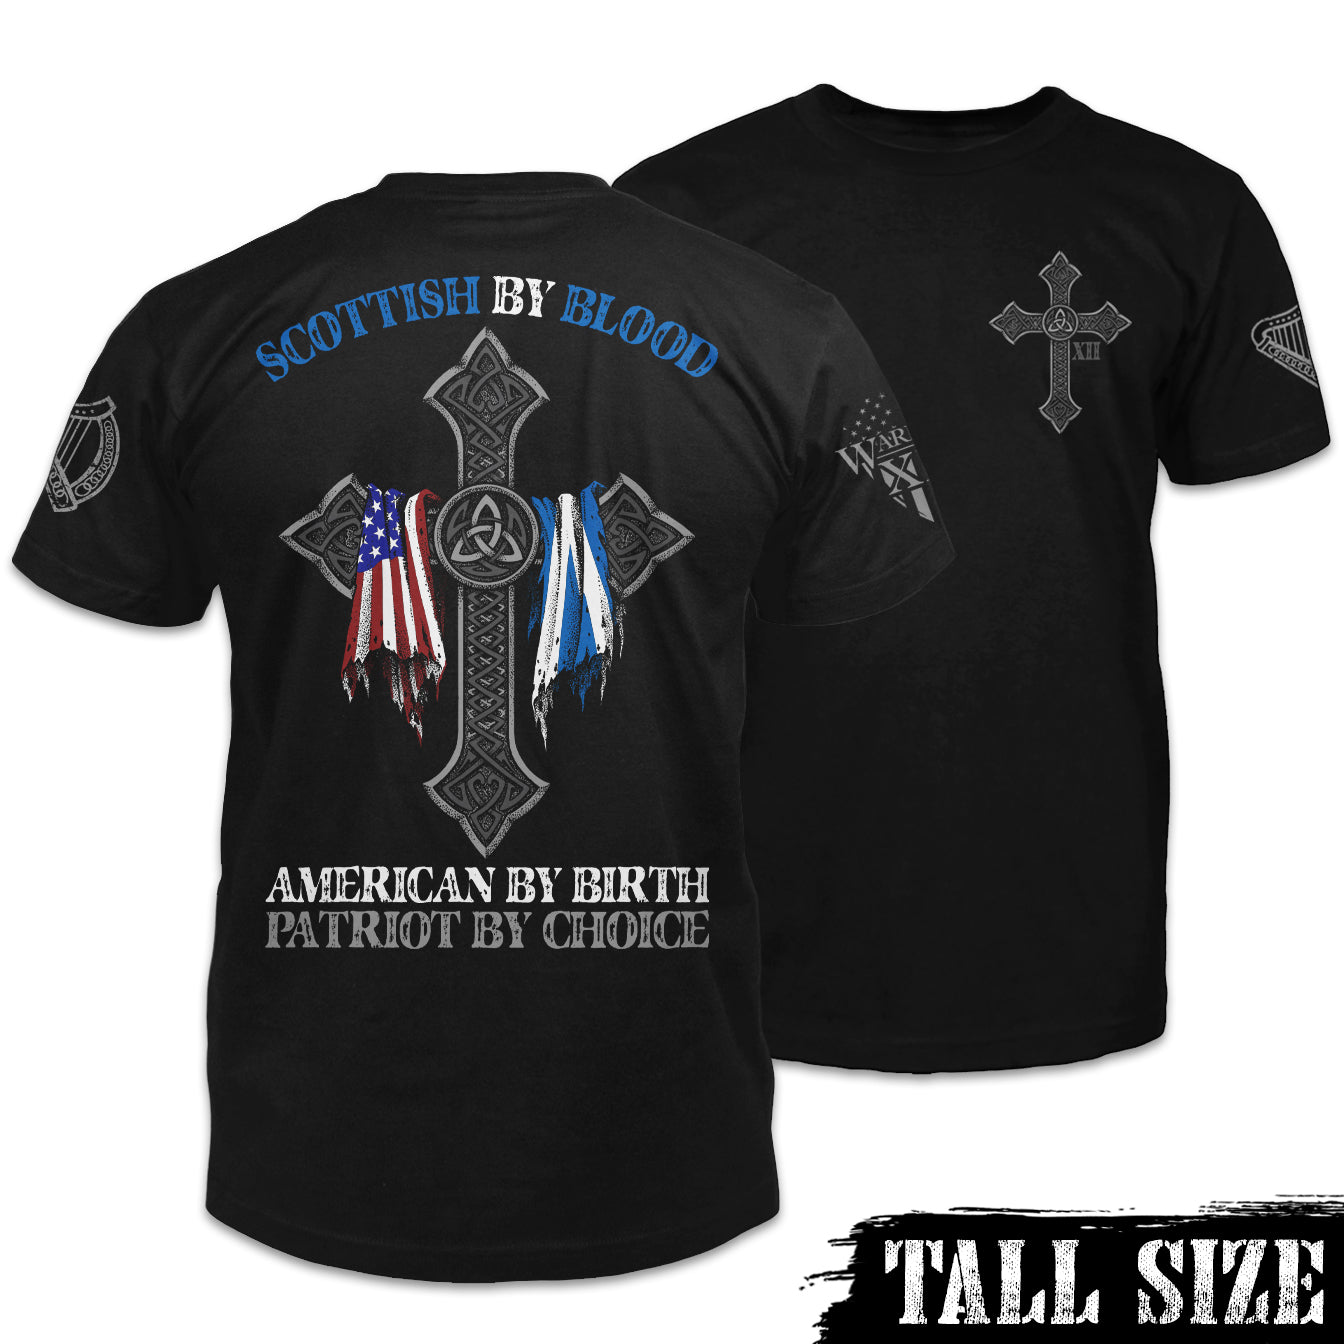 Front and back black tall size shirt with the words "Scottish by blood, American by birth, patriot by choice" with a cross holding the American and Scottish flag printed on the shirt.